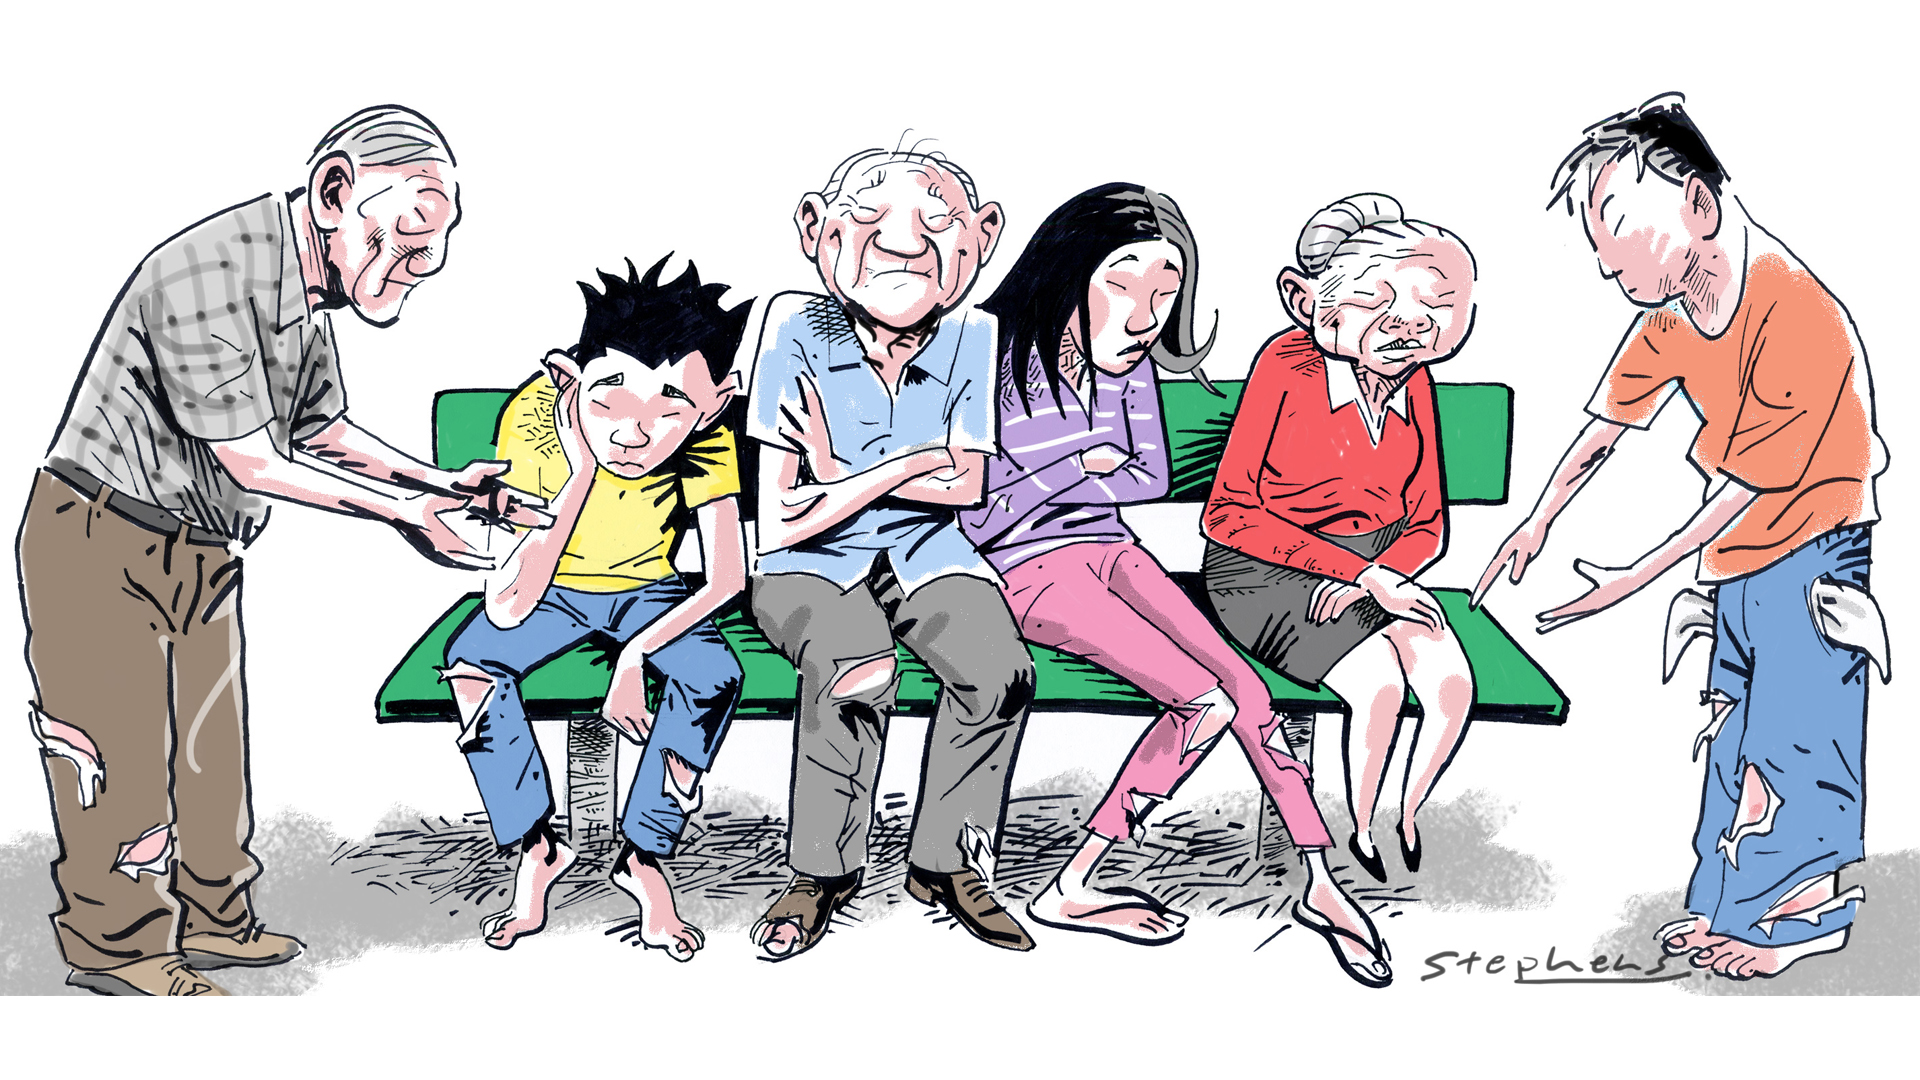 In Hong Kong, the poverty rate among older adults is twice that of the general population, at 30.5 per cent versus 14.5 per cent in 2013.